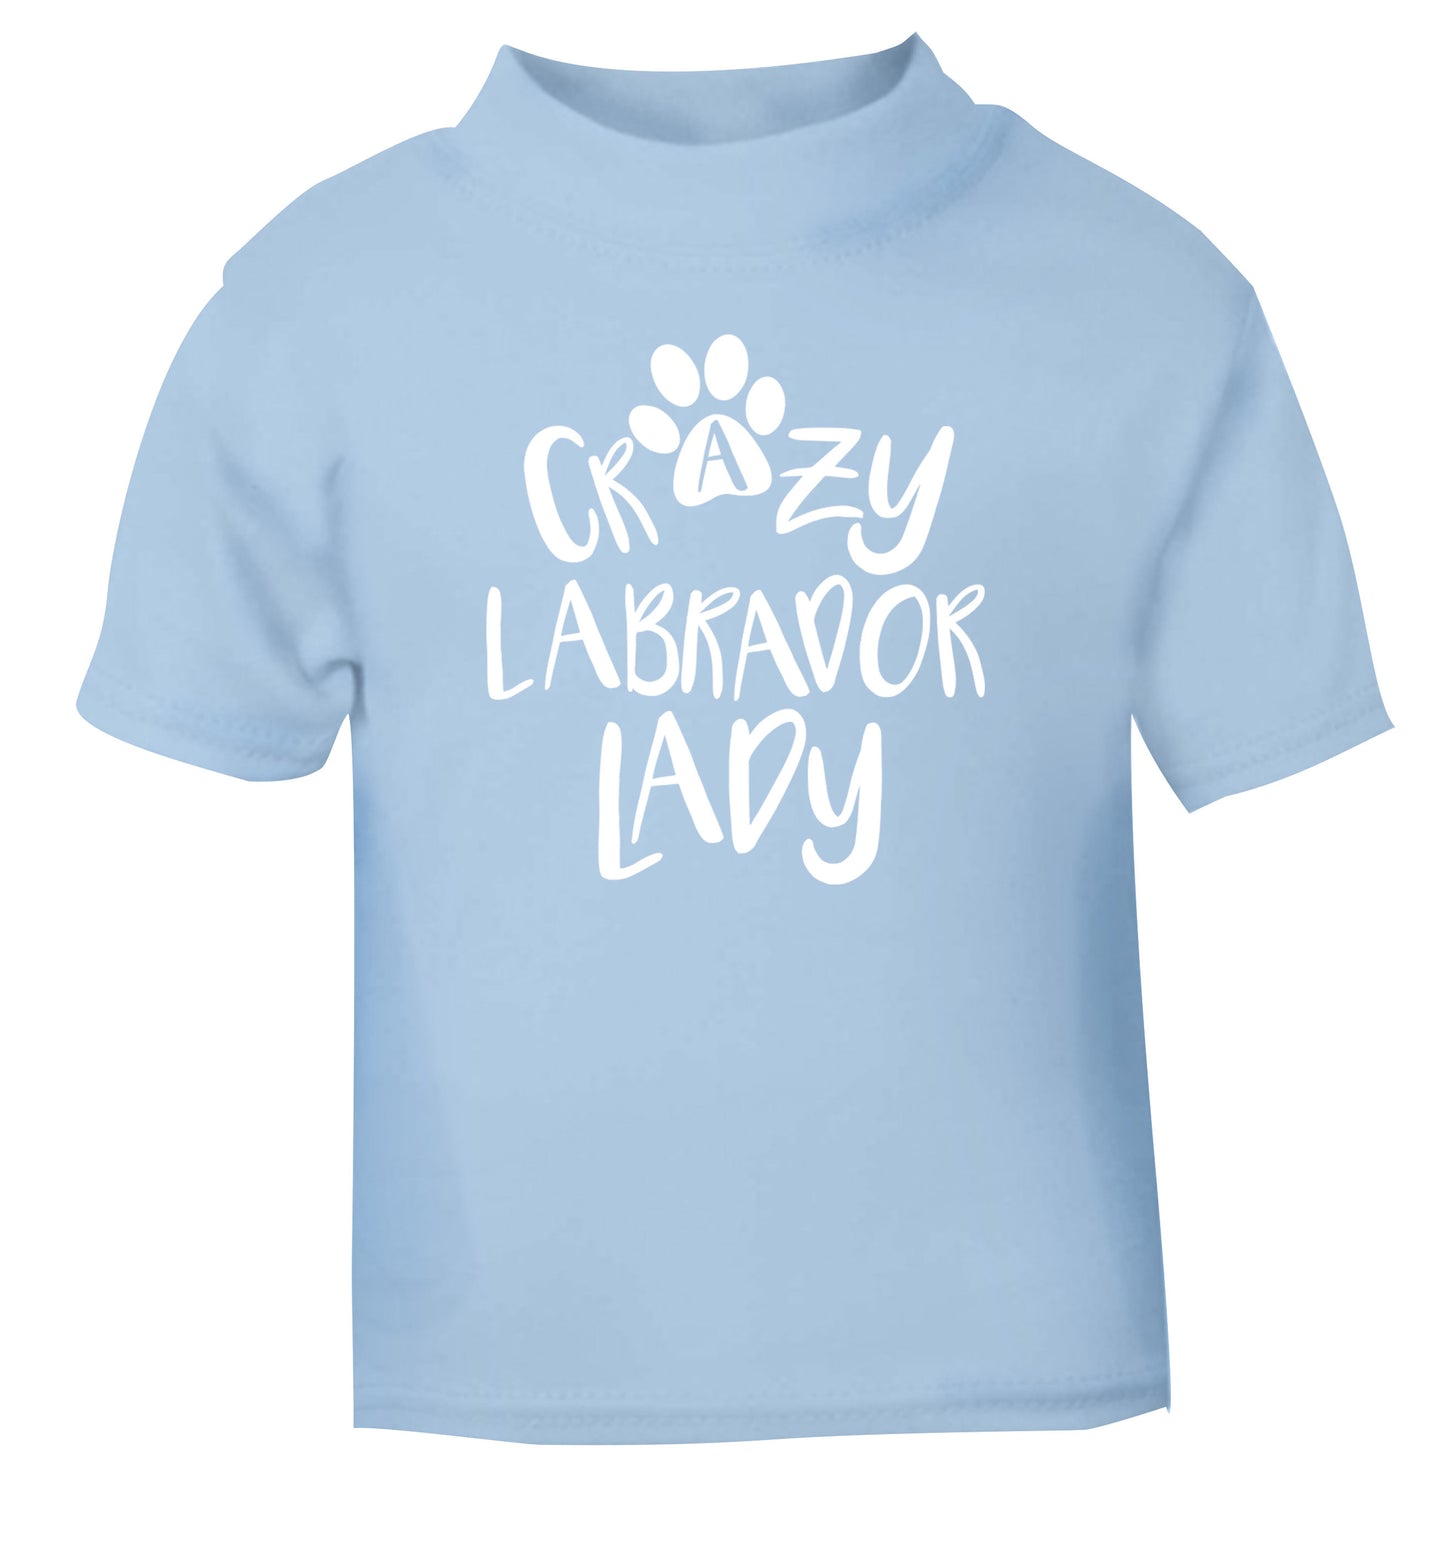 Crazy labrador lady light blue Baby Toddler Tshirt 2 Years